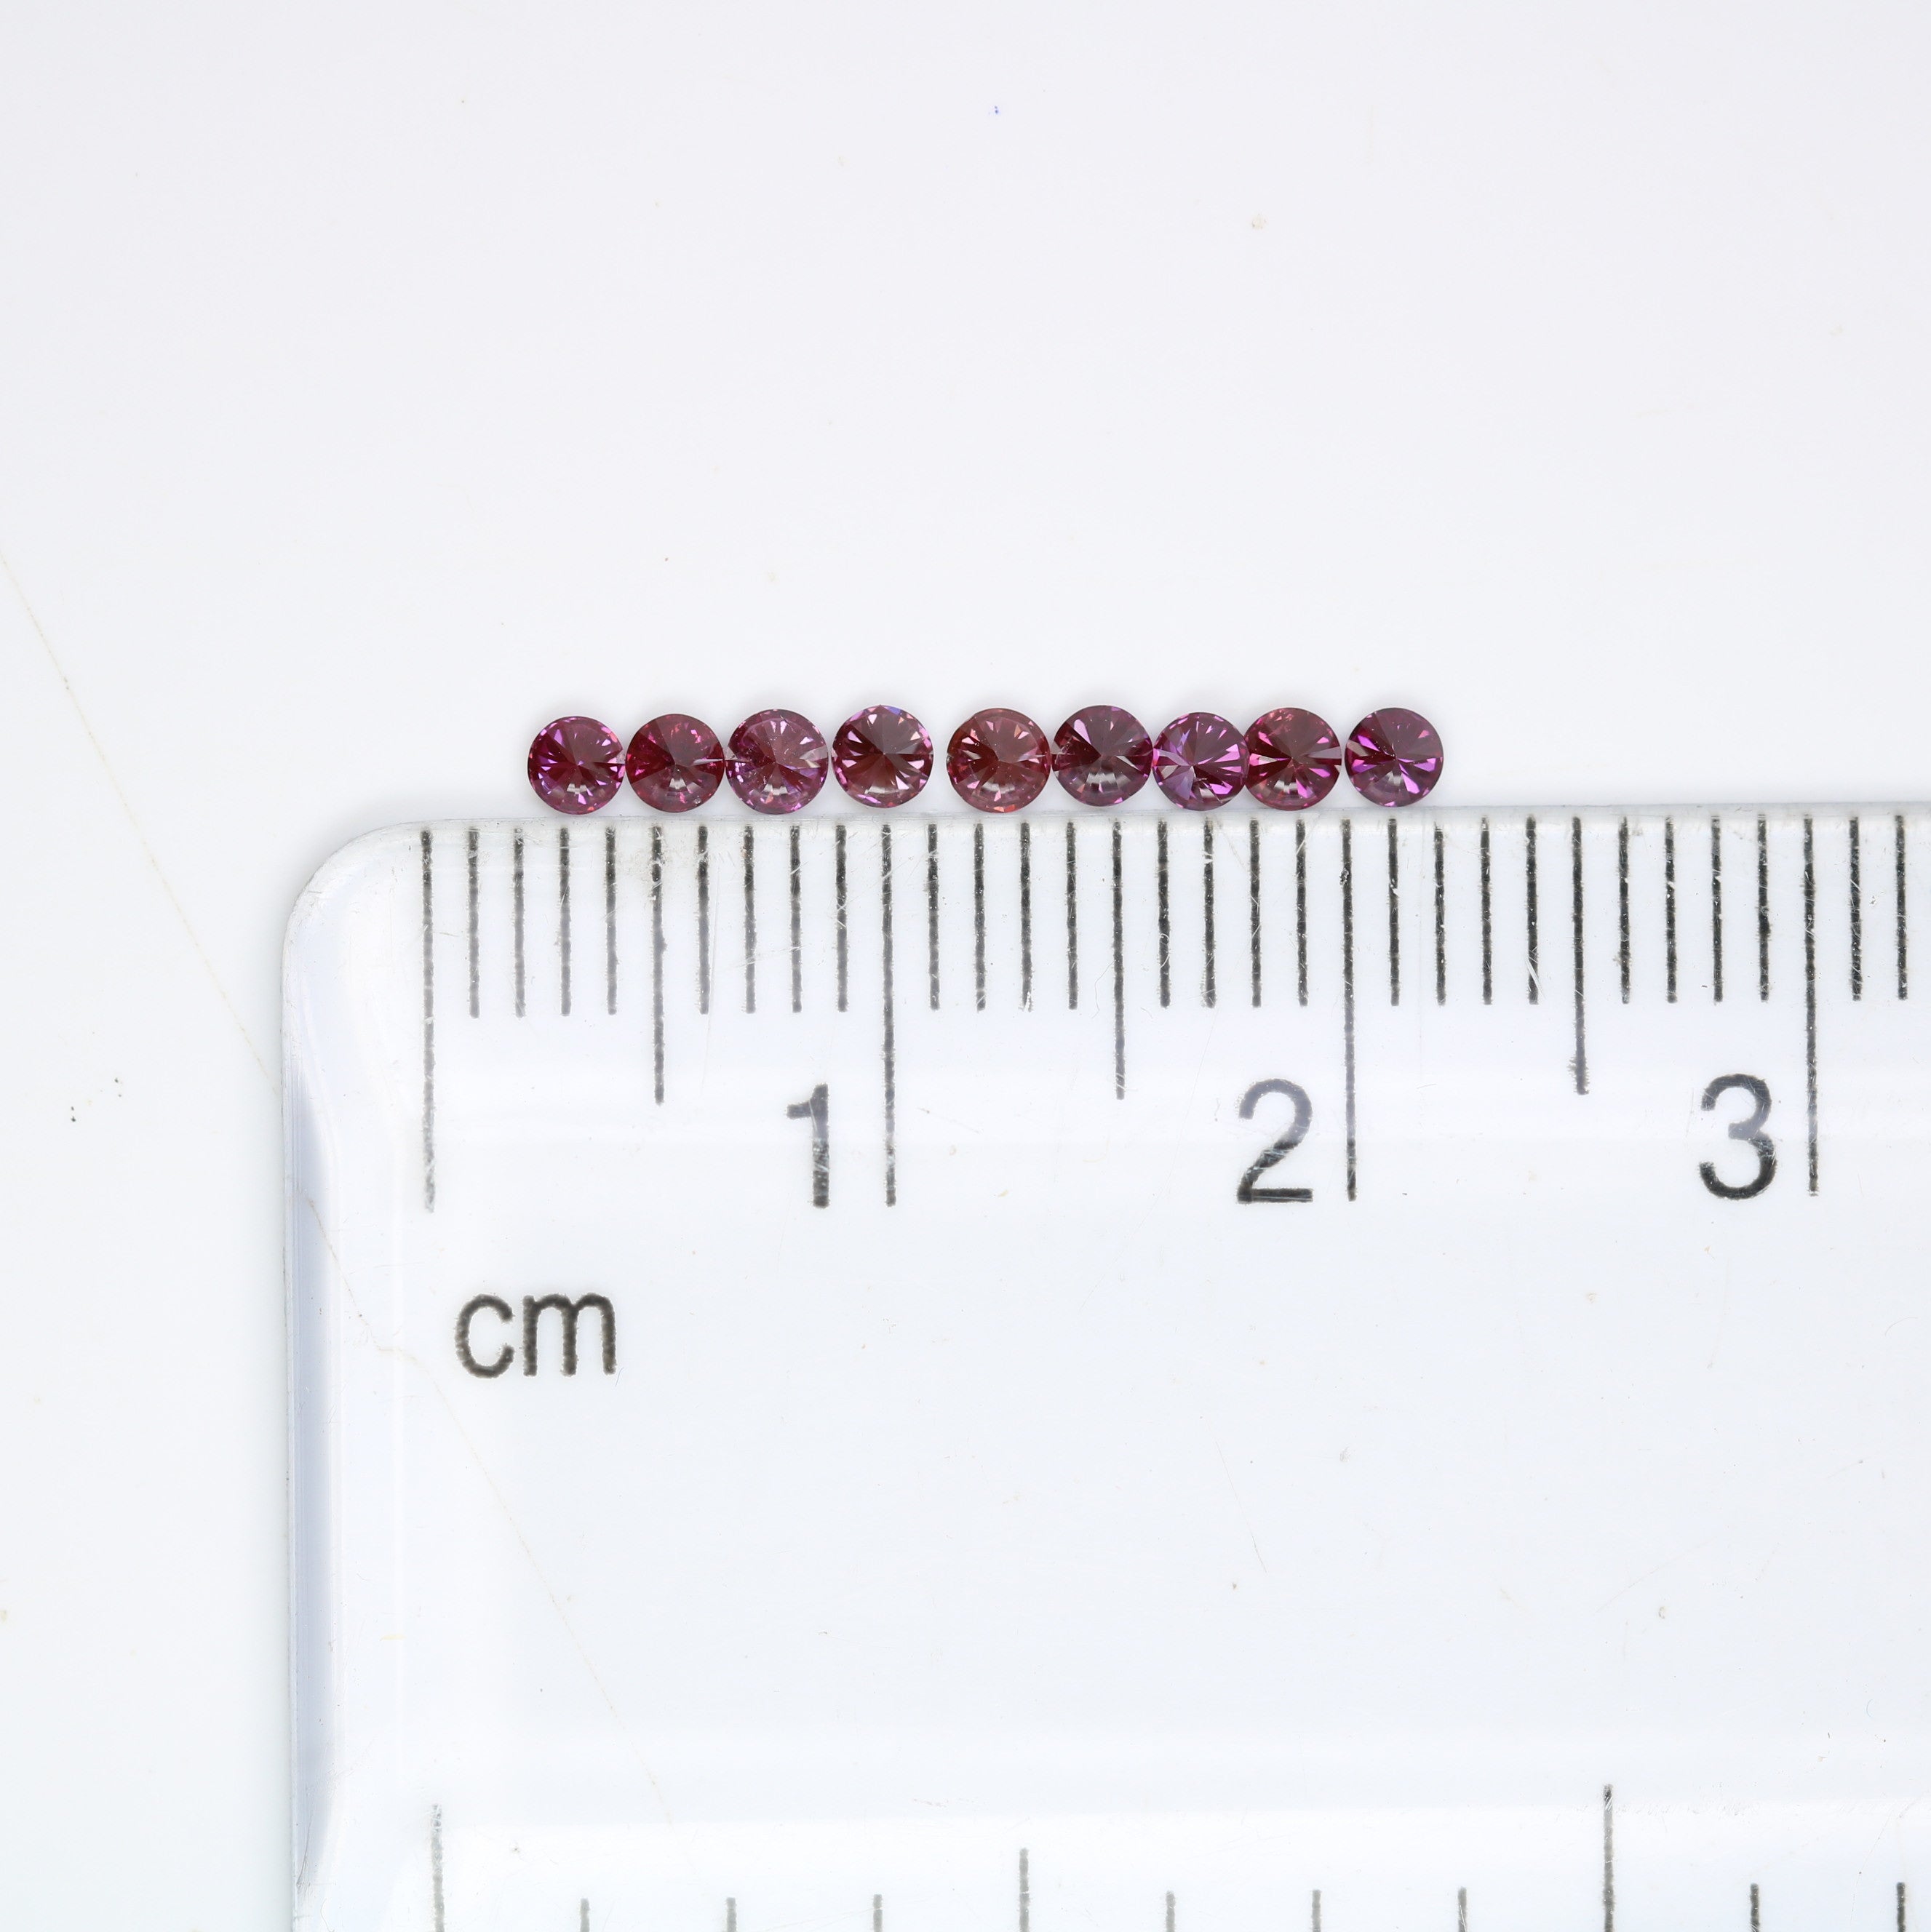 0.39 CT 2.10 to 2.20 MM Round Brilliant Cut Dark Pink Diamond For Engagement Ring